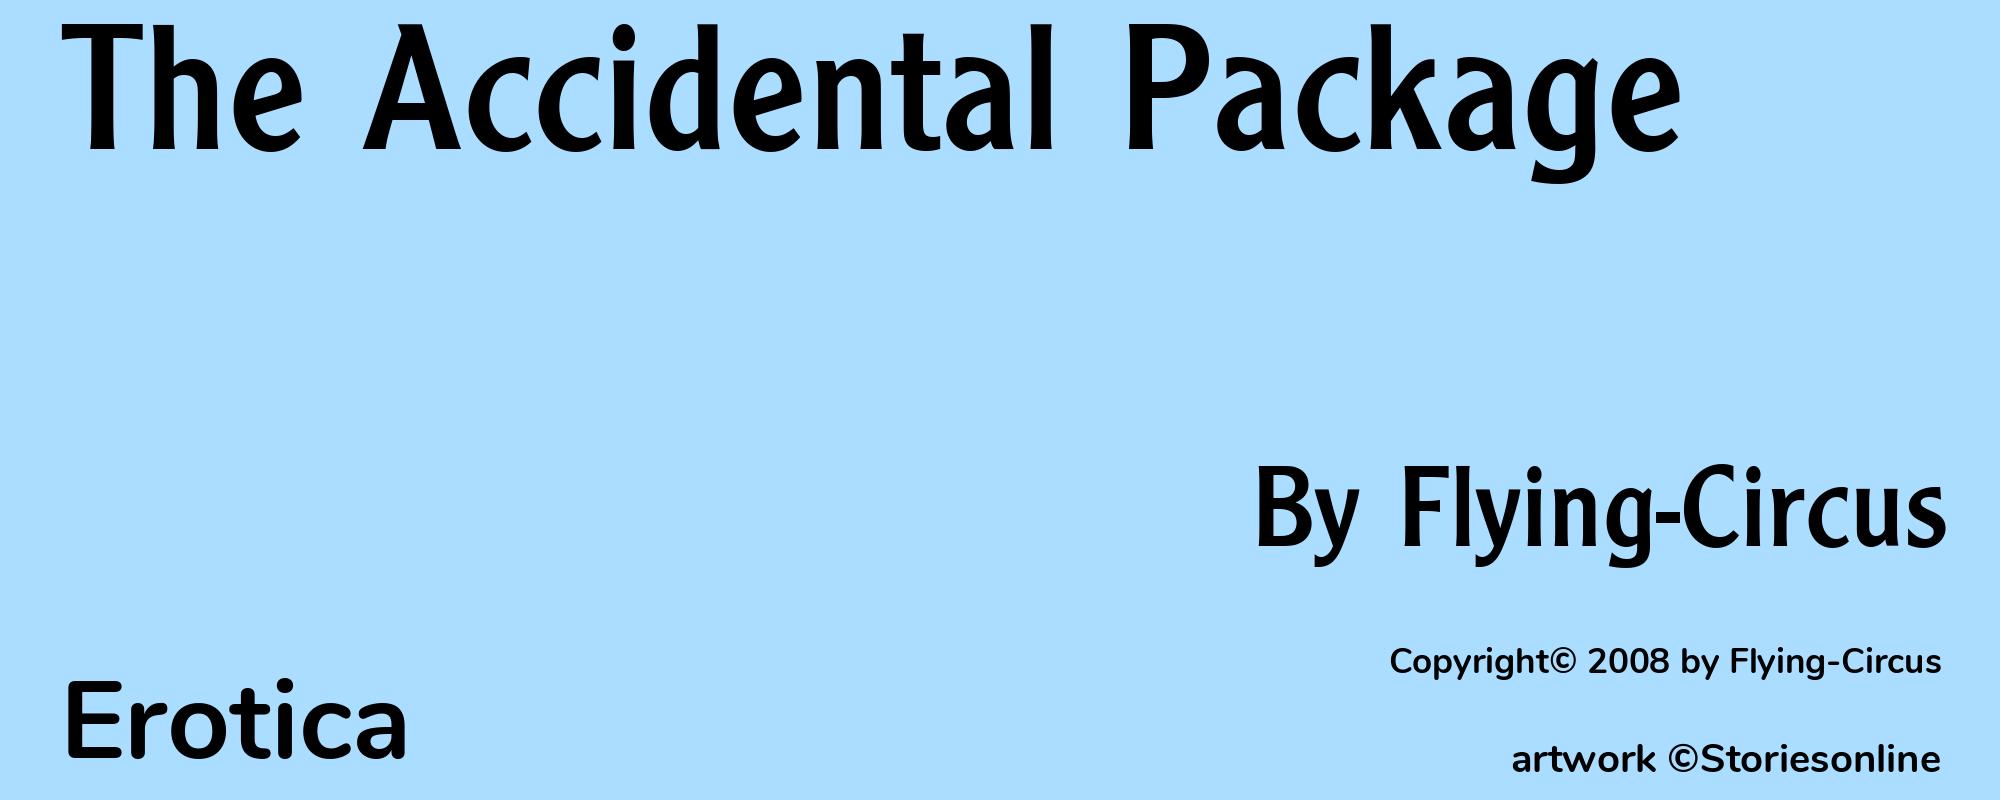 The Accidental Package - Cover